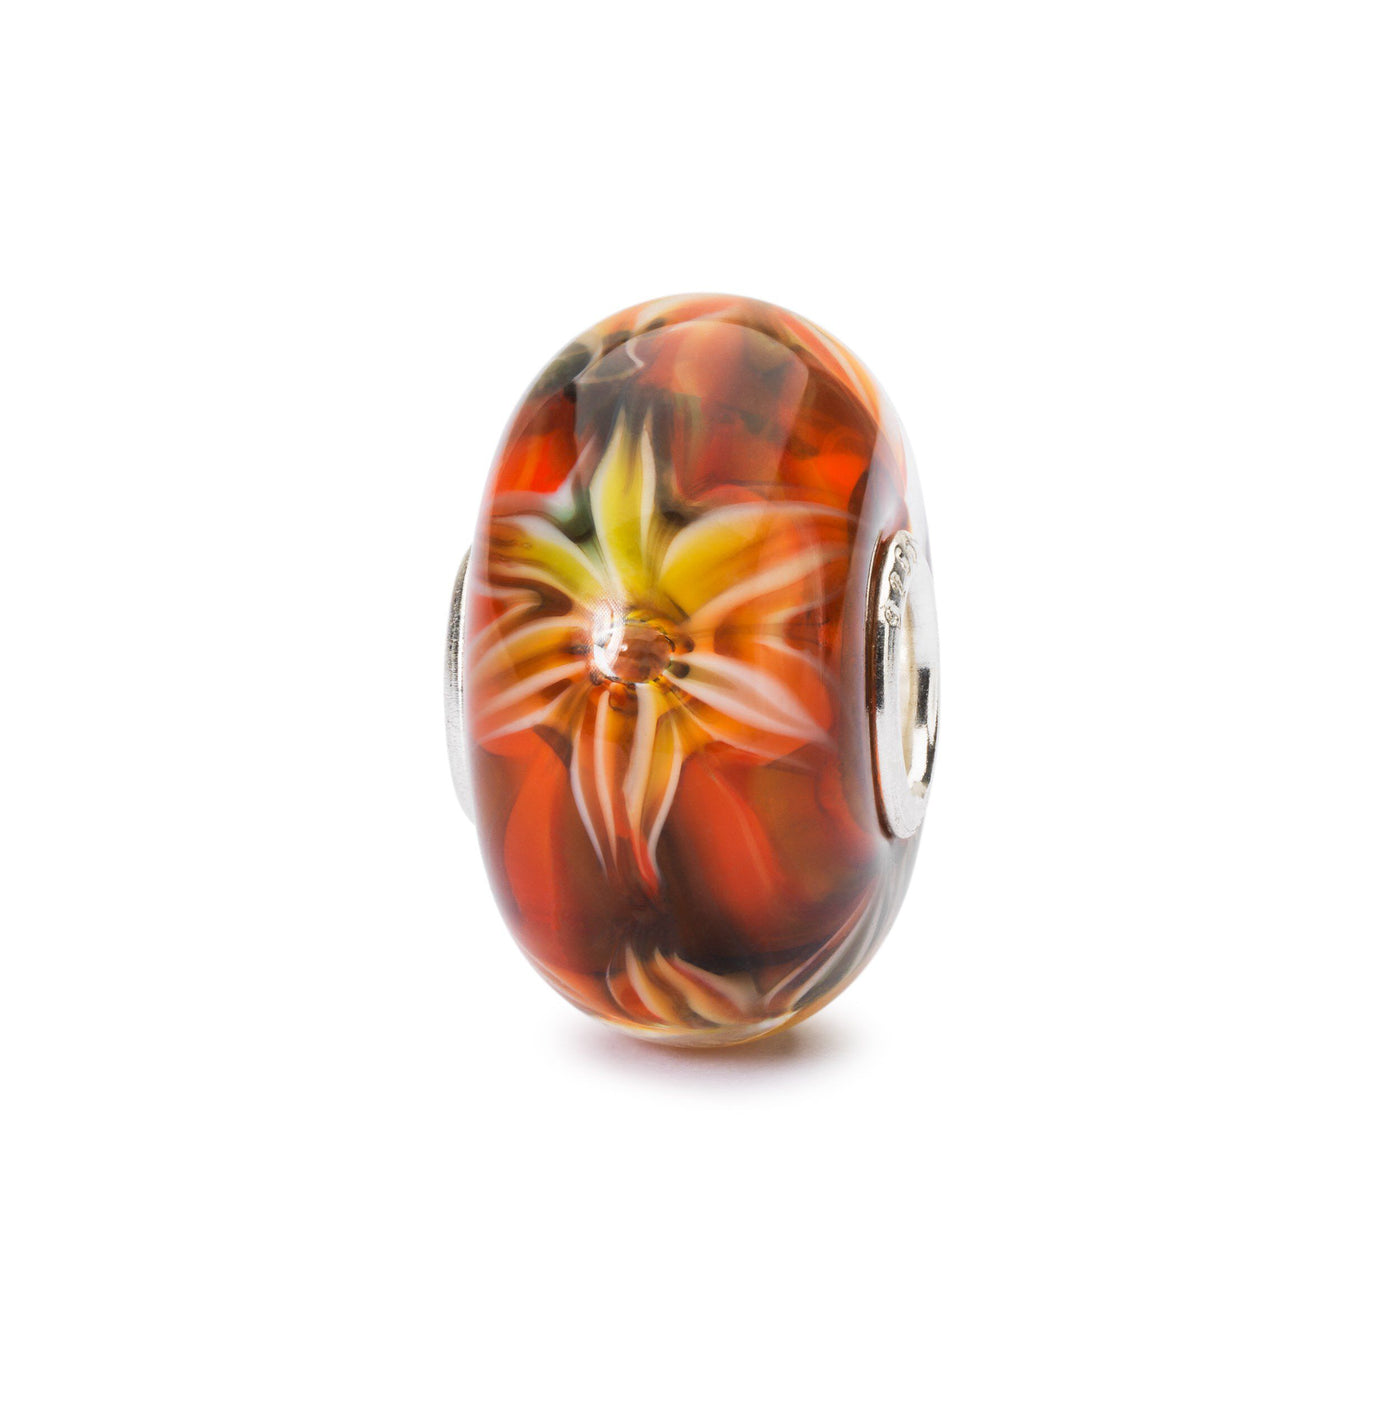 Flowers of Passion - Trollbeads Canada